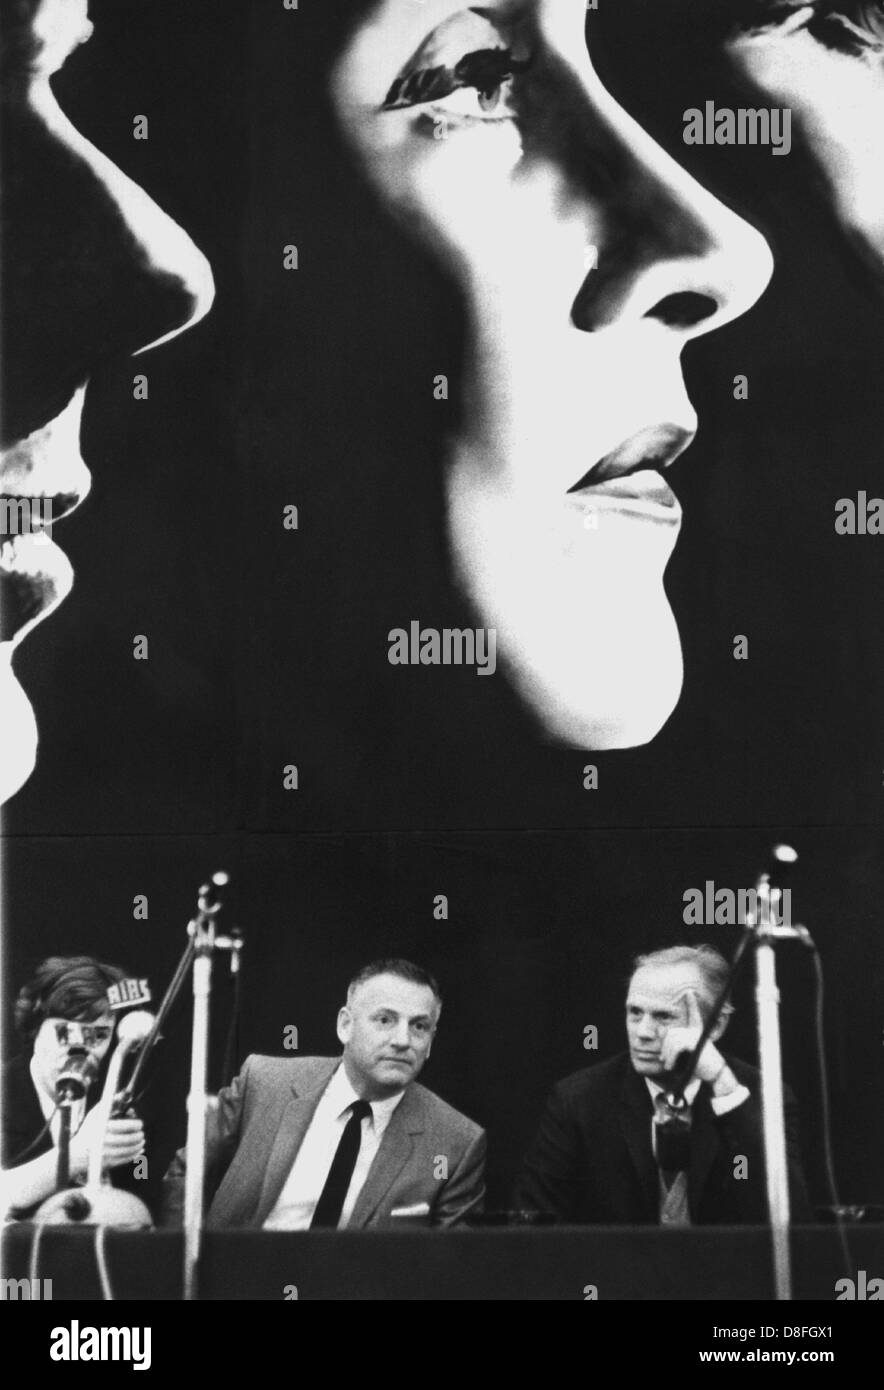 American director Stanley Kramer (r) excuses the protagonists Marlene Dietrich's and Burt Lancaster's absence at the world premiere of the film 'Judgment at Nuremberg', at a press conference on the 13th of December in 1961. Stock Photo